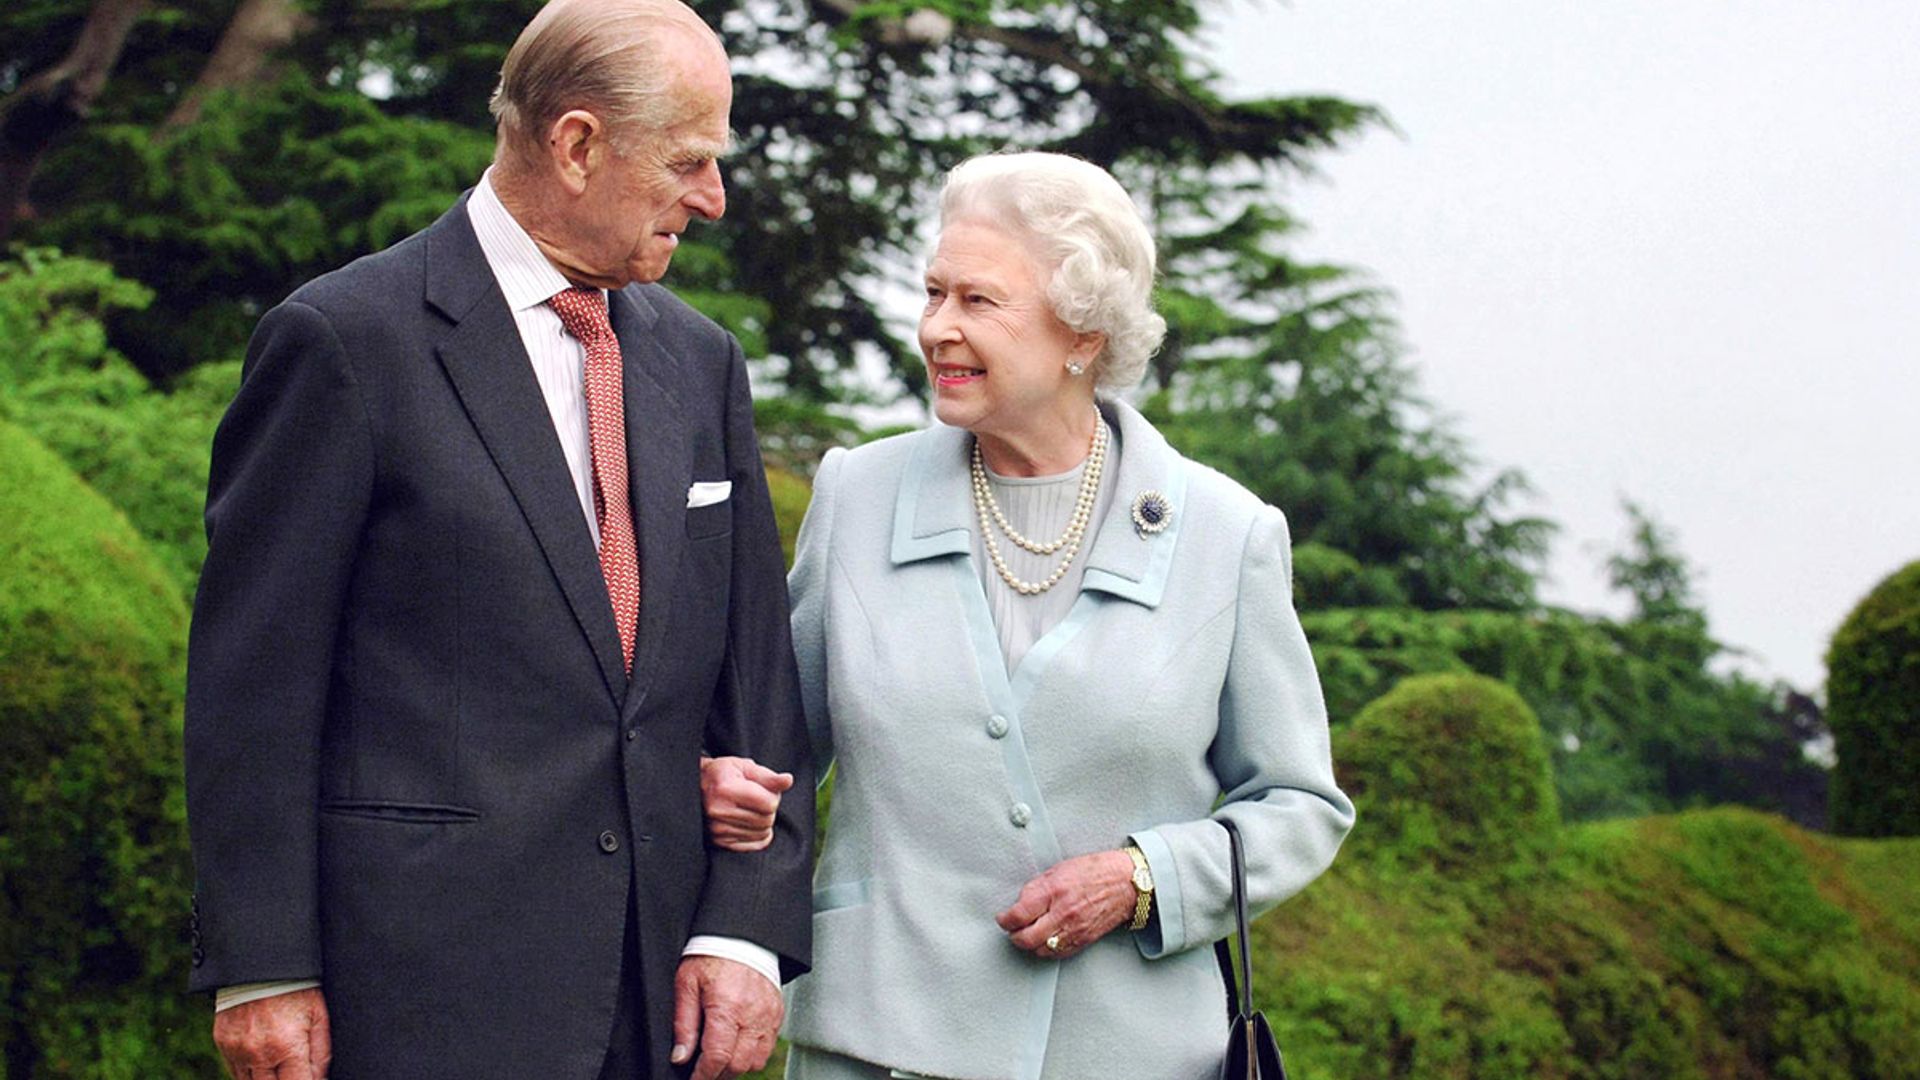 The Queen 'signs off' Windsor Castle exhibition to celebrate Prince Philip's life - report